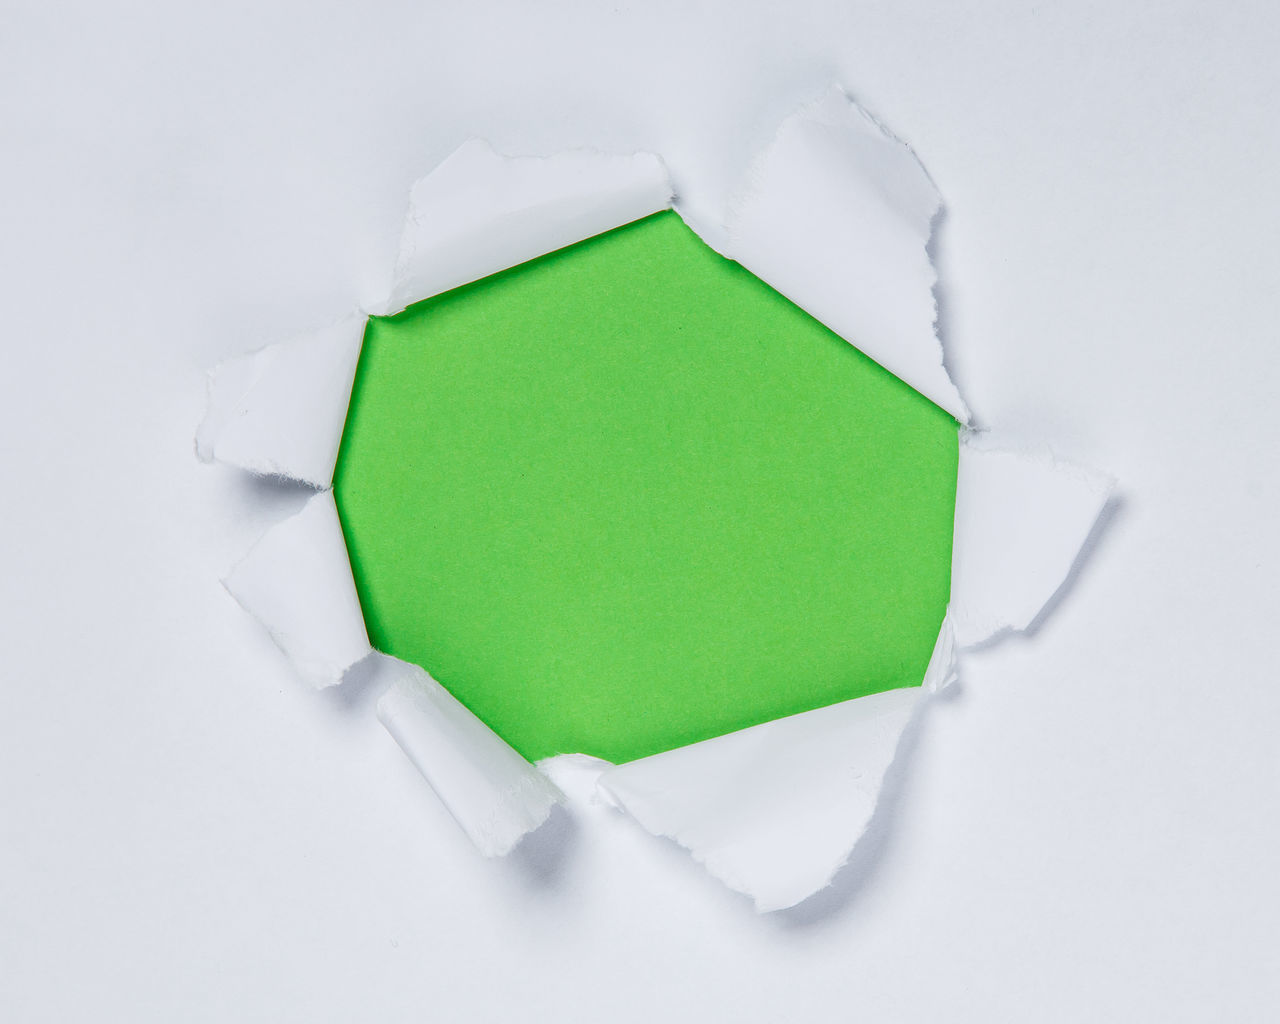 HIGH ANGLE VIEW OF GREEN PAPER ON WHITE BACKGROUND